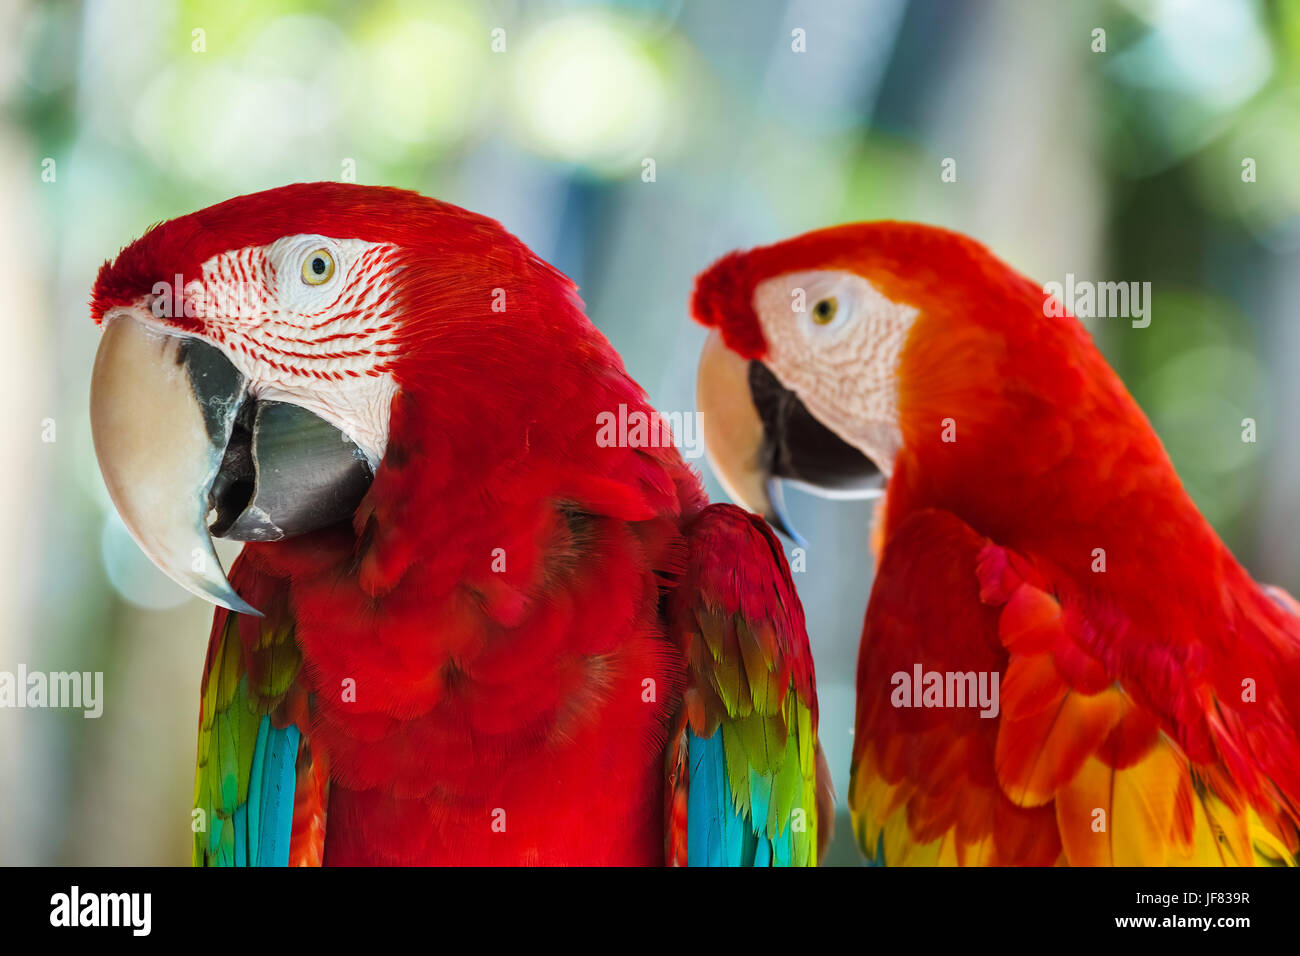 Parrots in Bali Island Indonesia Stock Photo